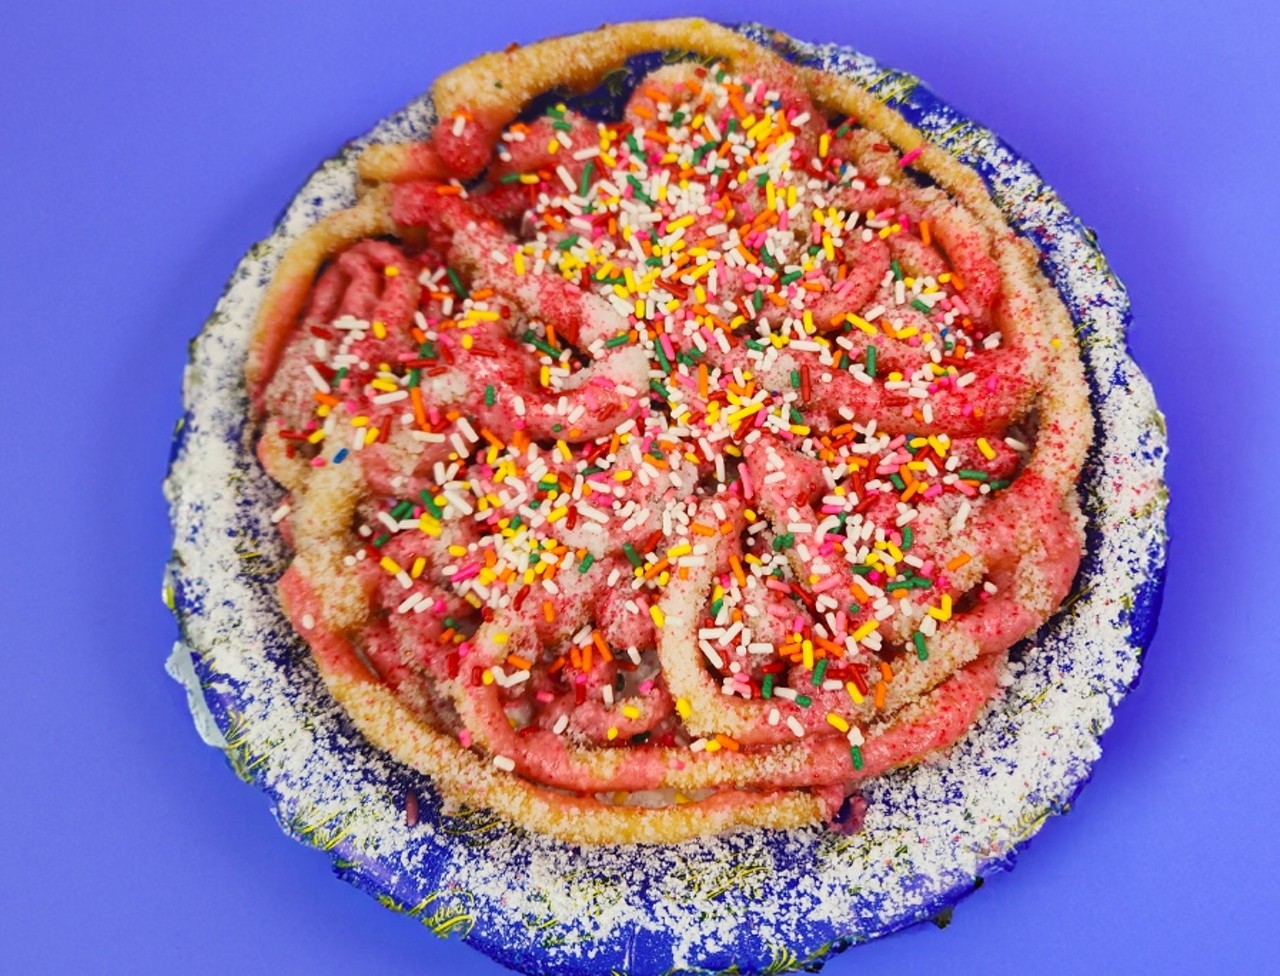 Barbie Funnel Cake
Funnel Cake with Powdered Sugar, Barbie Pink Icing and 2 kinds of Sprinkles.
Location: Paulette's Food Service
